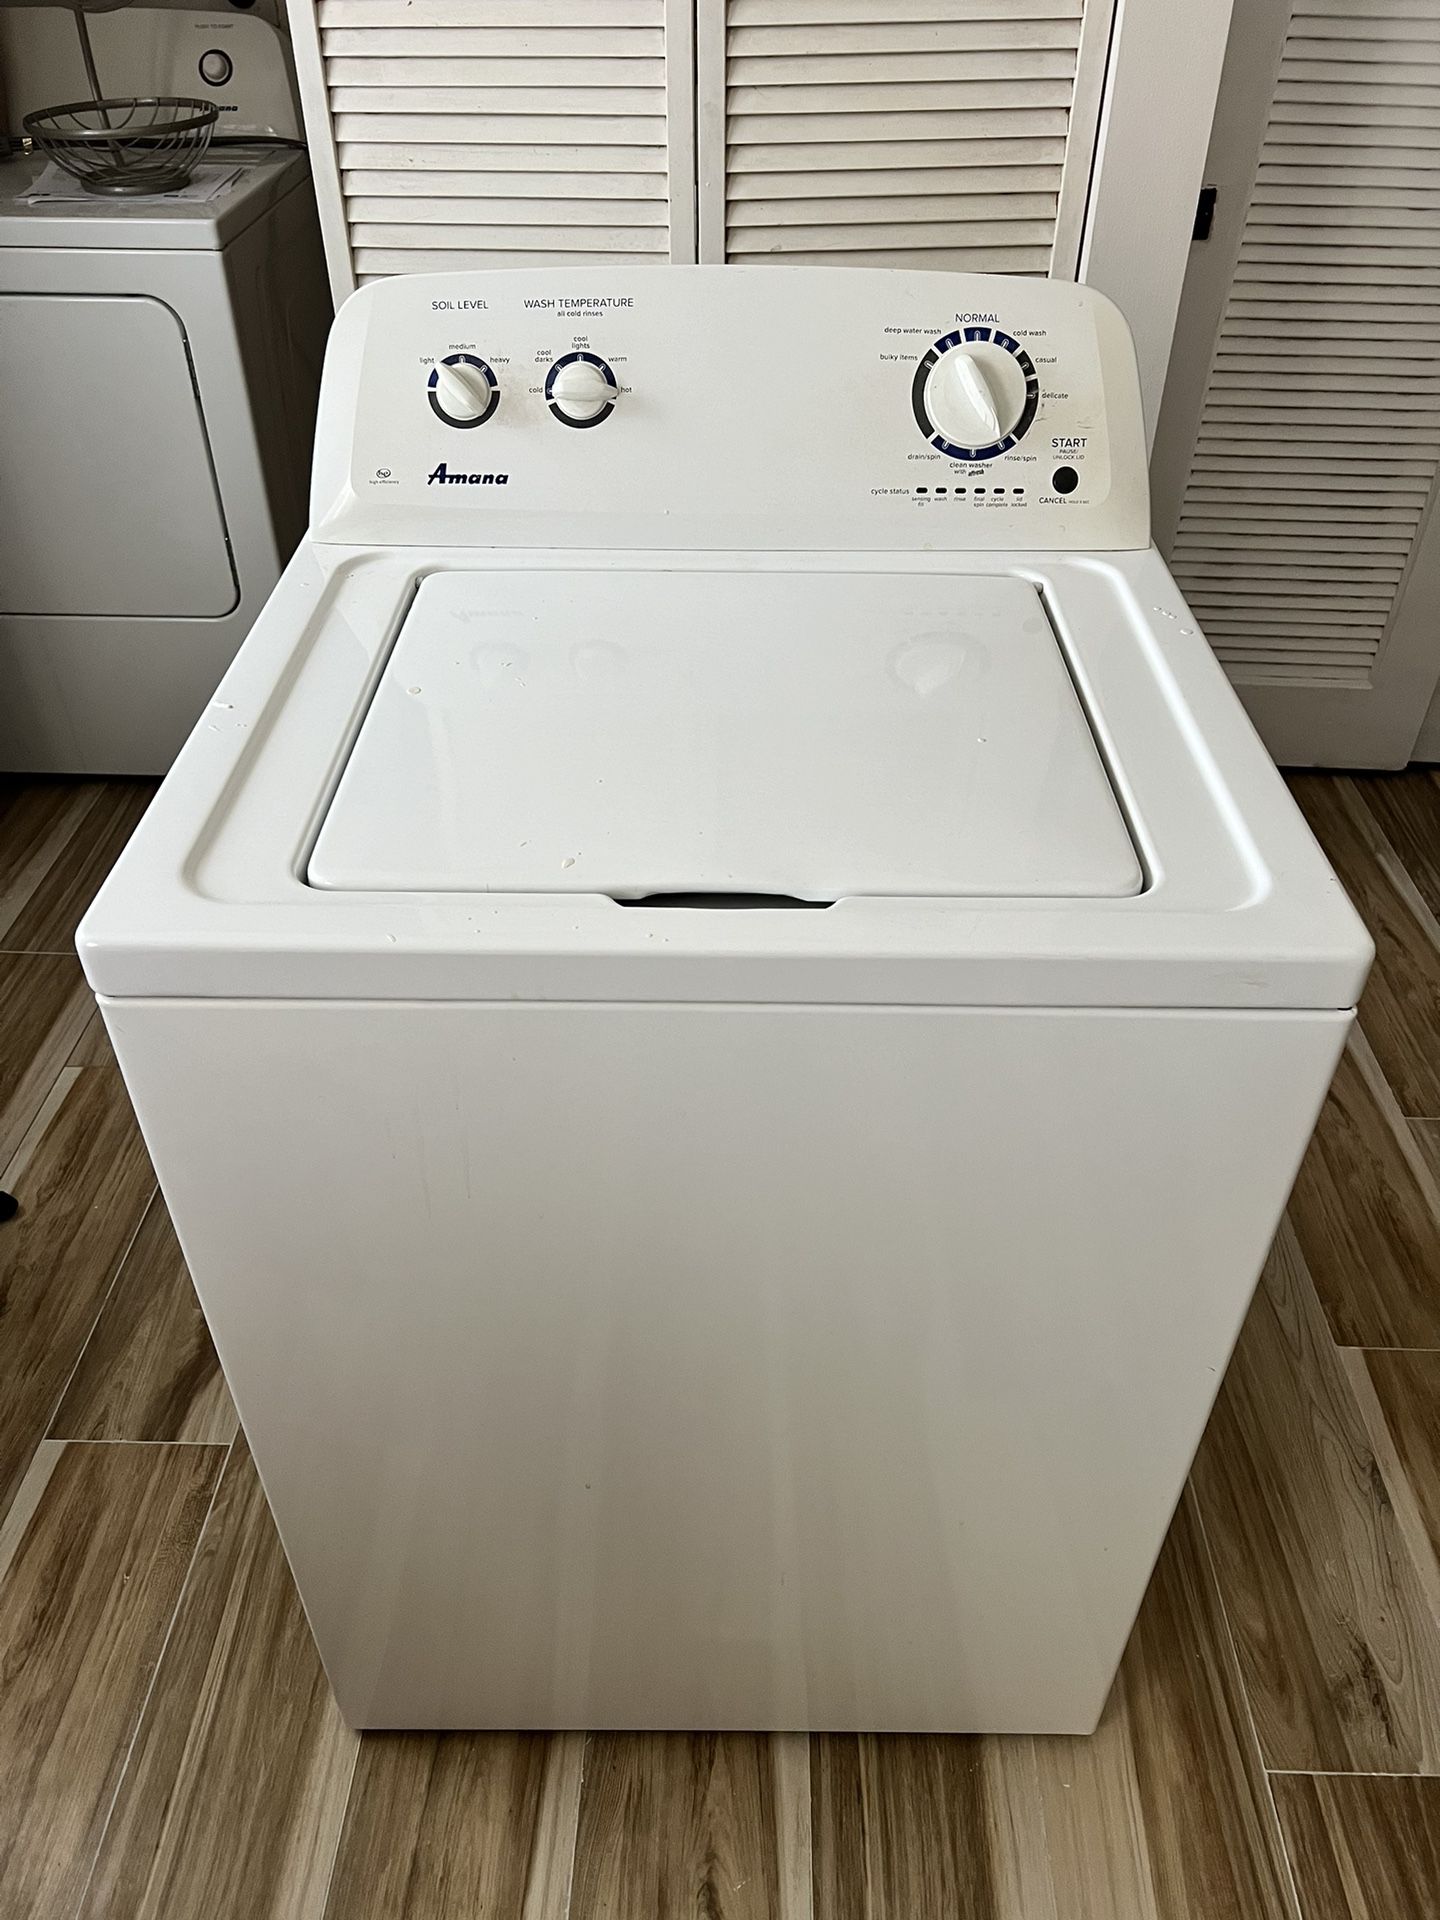 Amana (Washer And Dryer) Pair